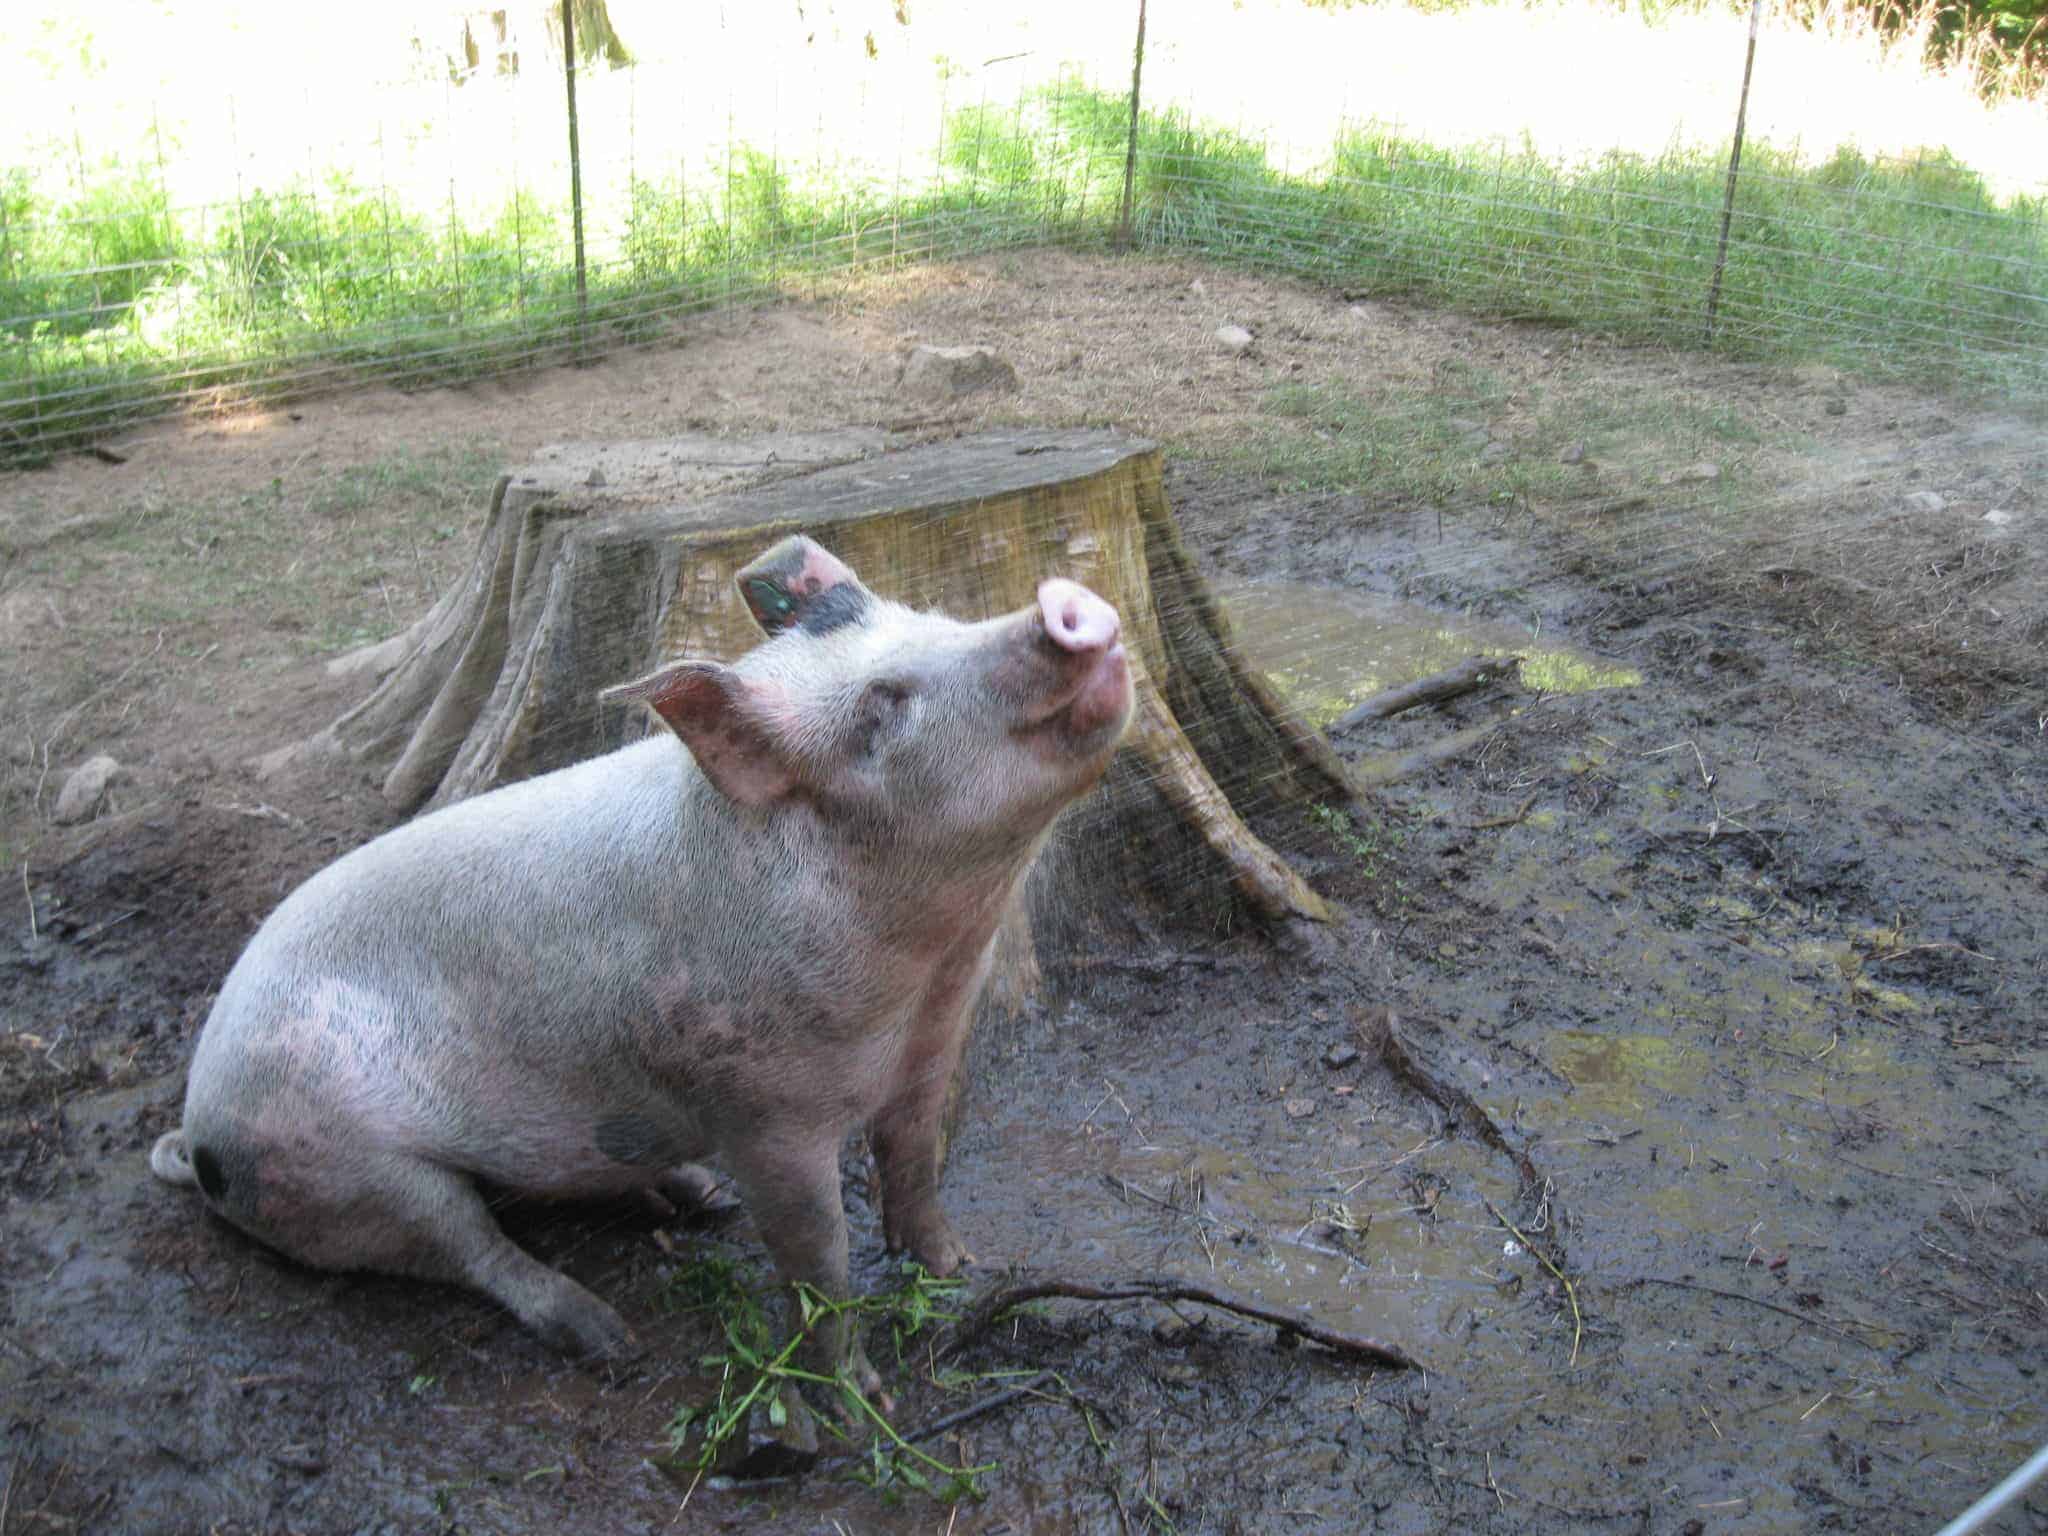 A pig being sprayed with a hose in a muddy area.